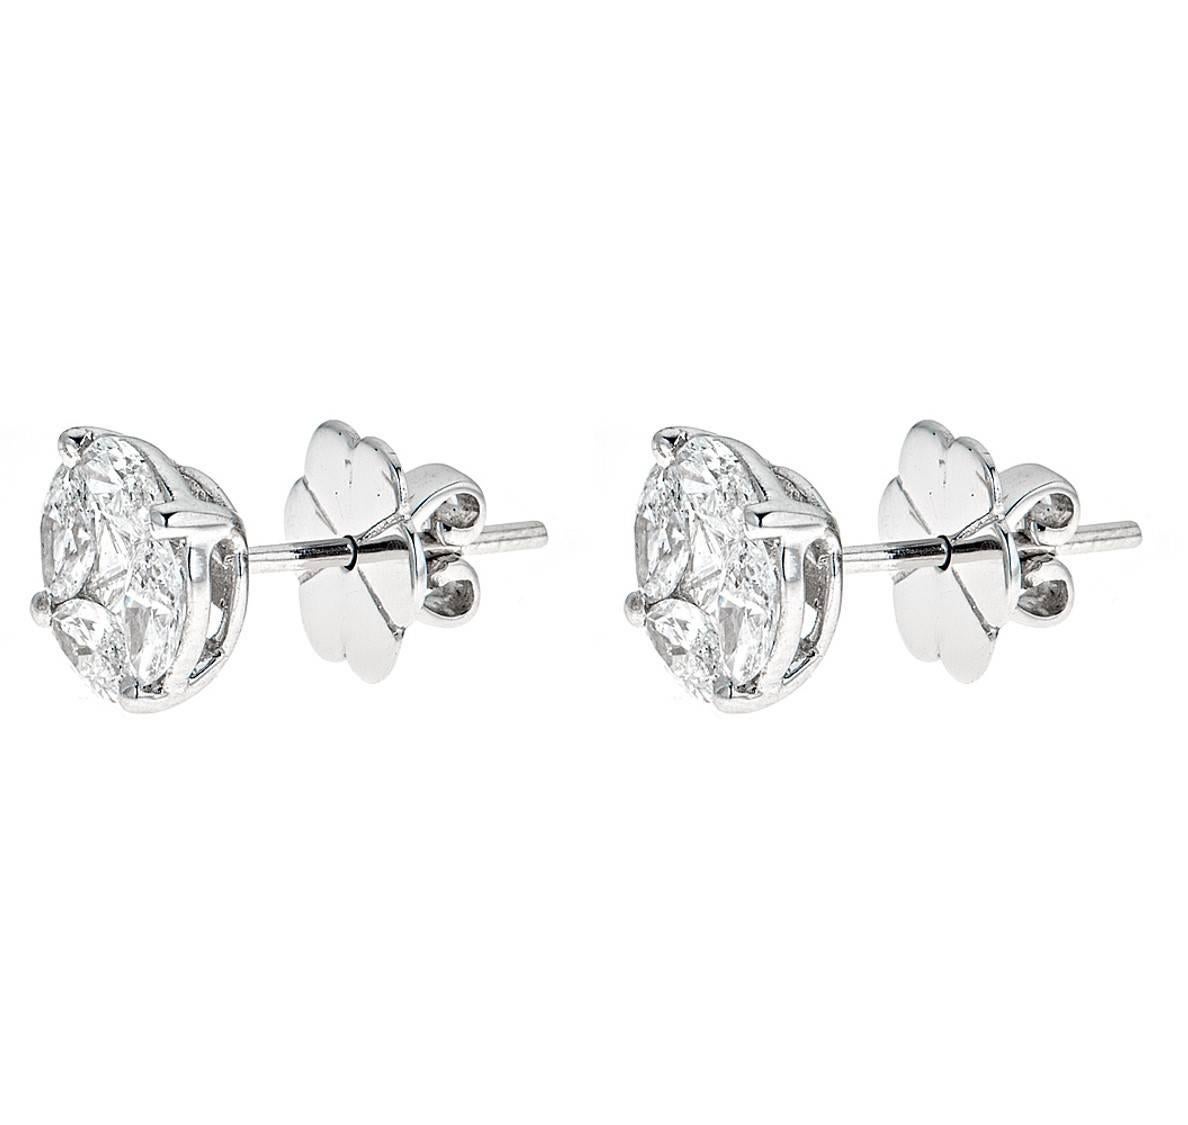 2.00 Carat Round Diamond White Gold Stud Earrings In Excellent Condition For Sale In New York, NY